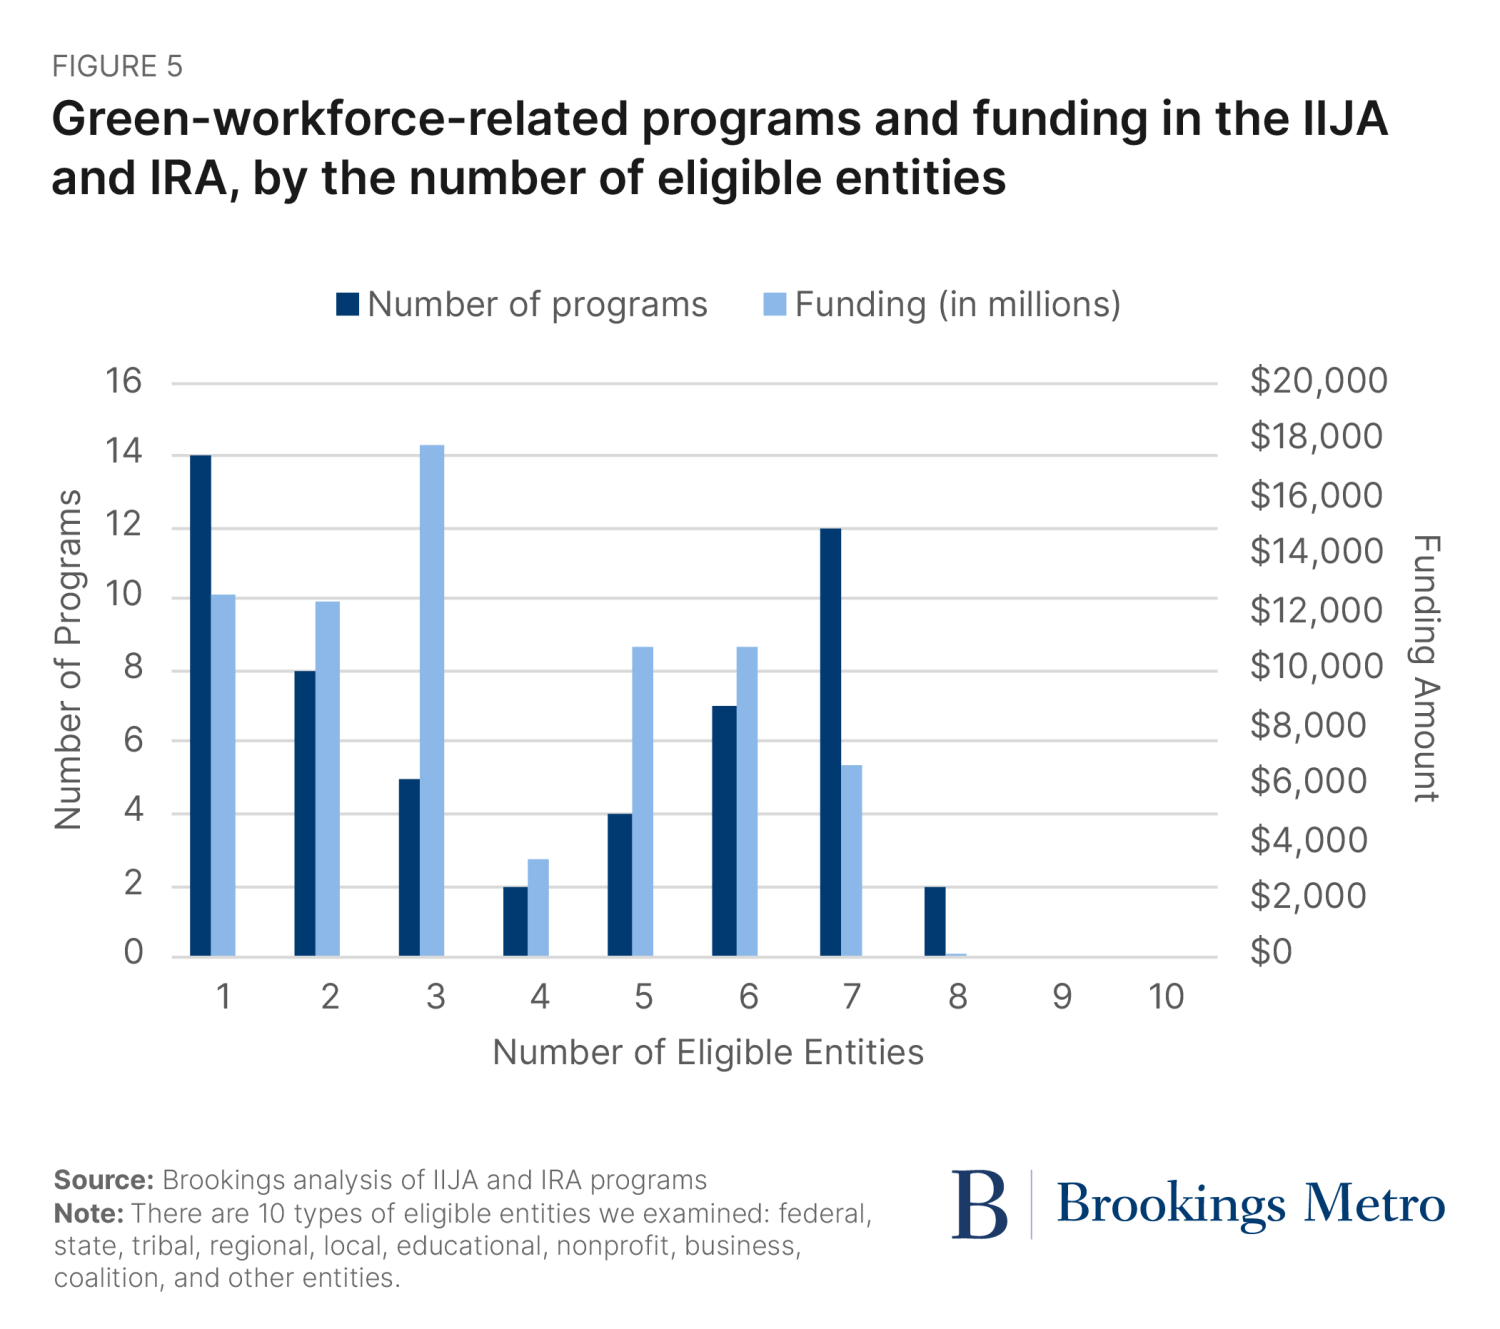 Figure 5. Green-workforce-related programs and funding in the IIJA and IRA, by the number of eligible entities